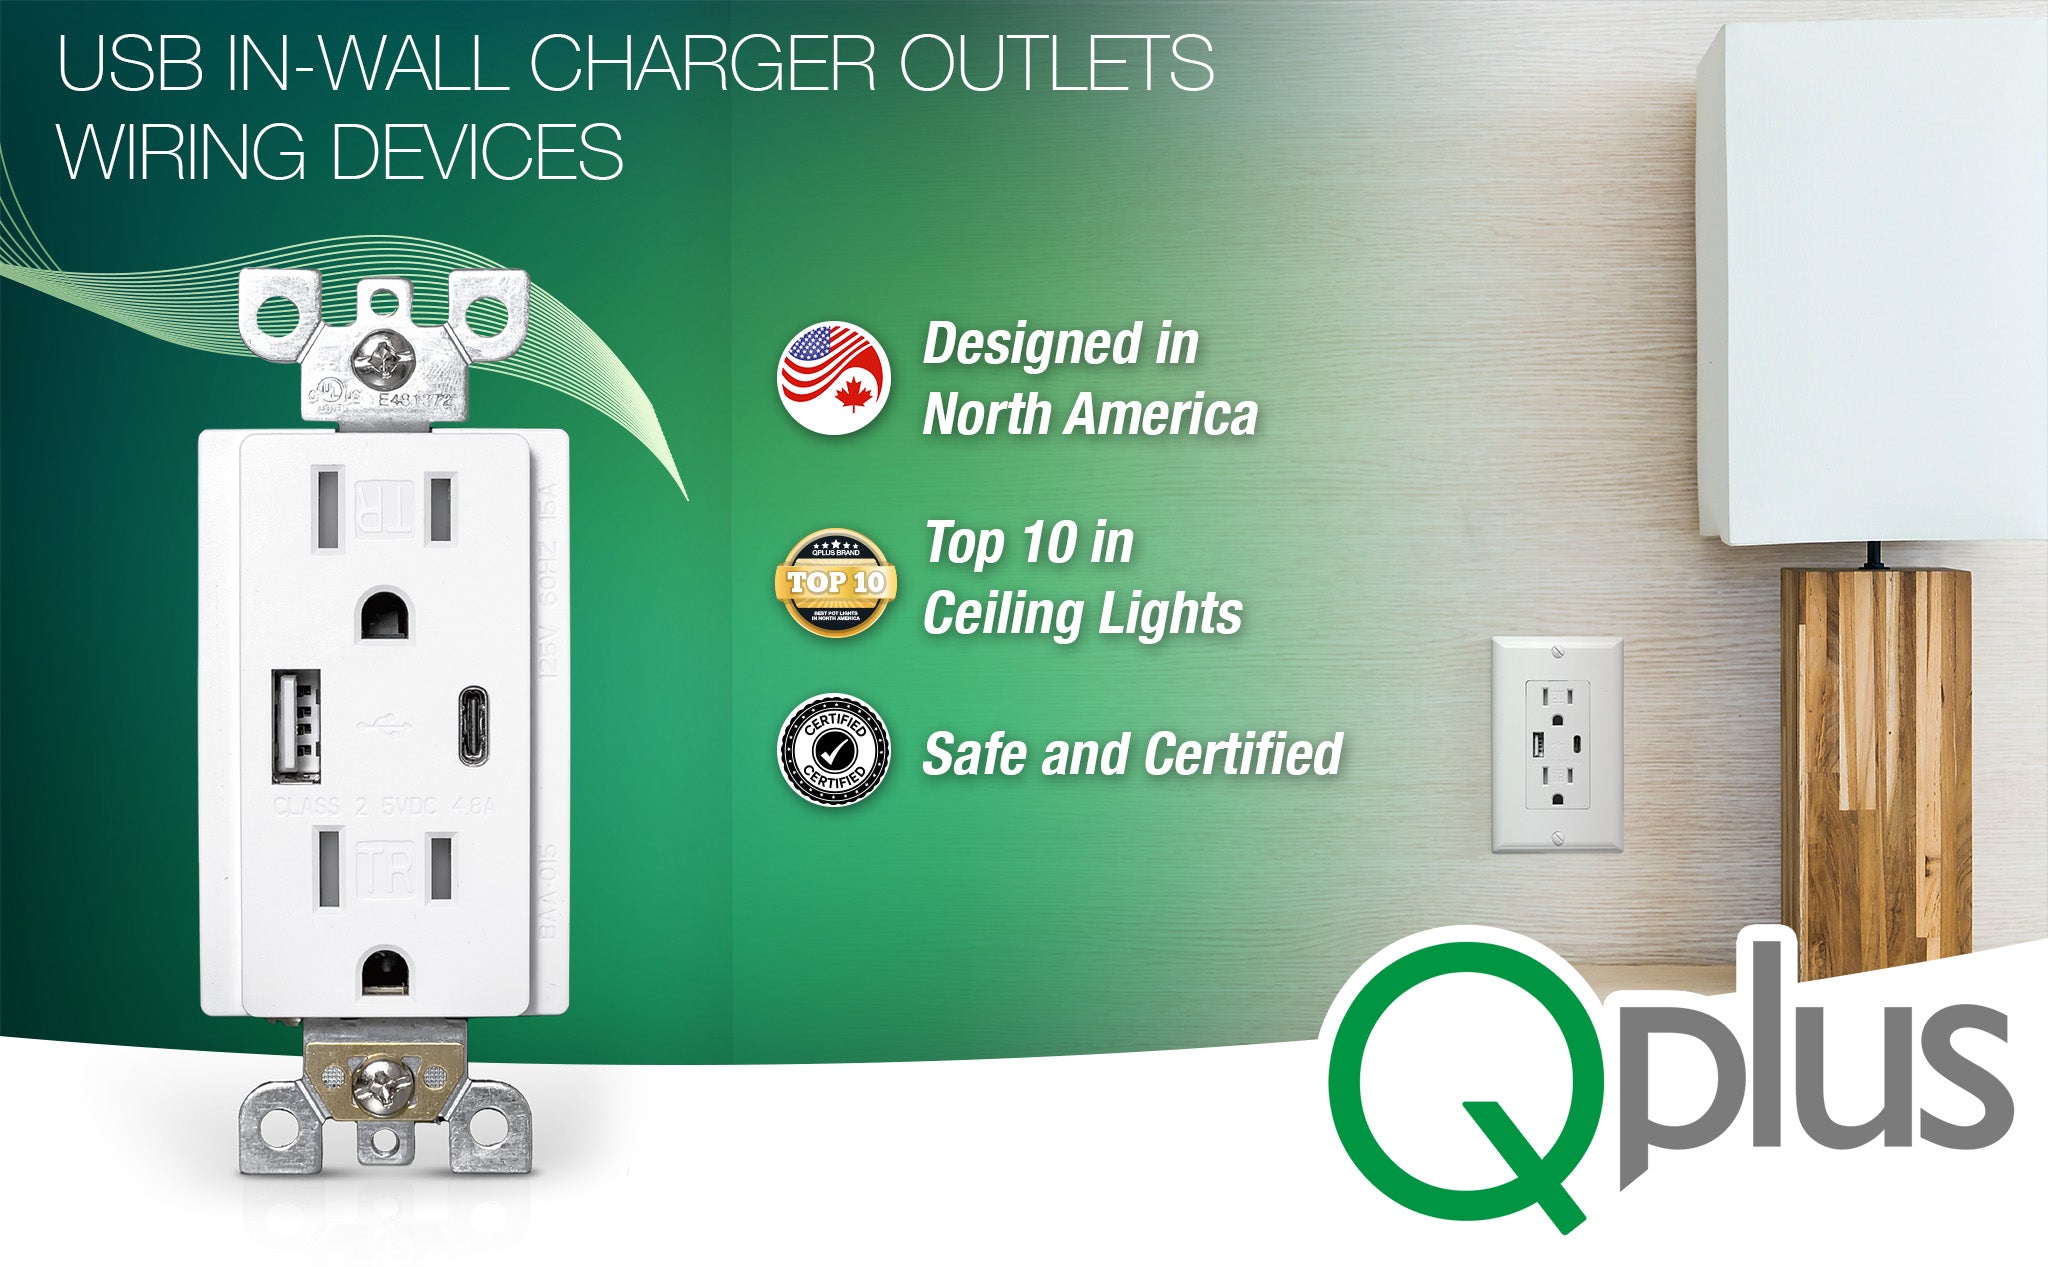 USB In-Wall Charger Outlets